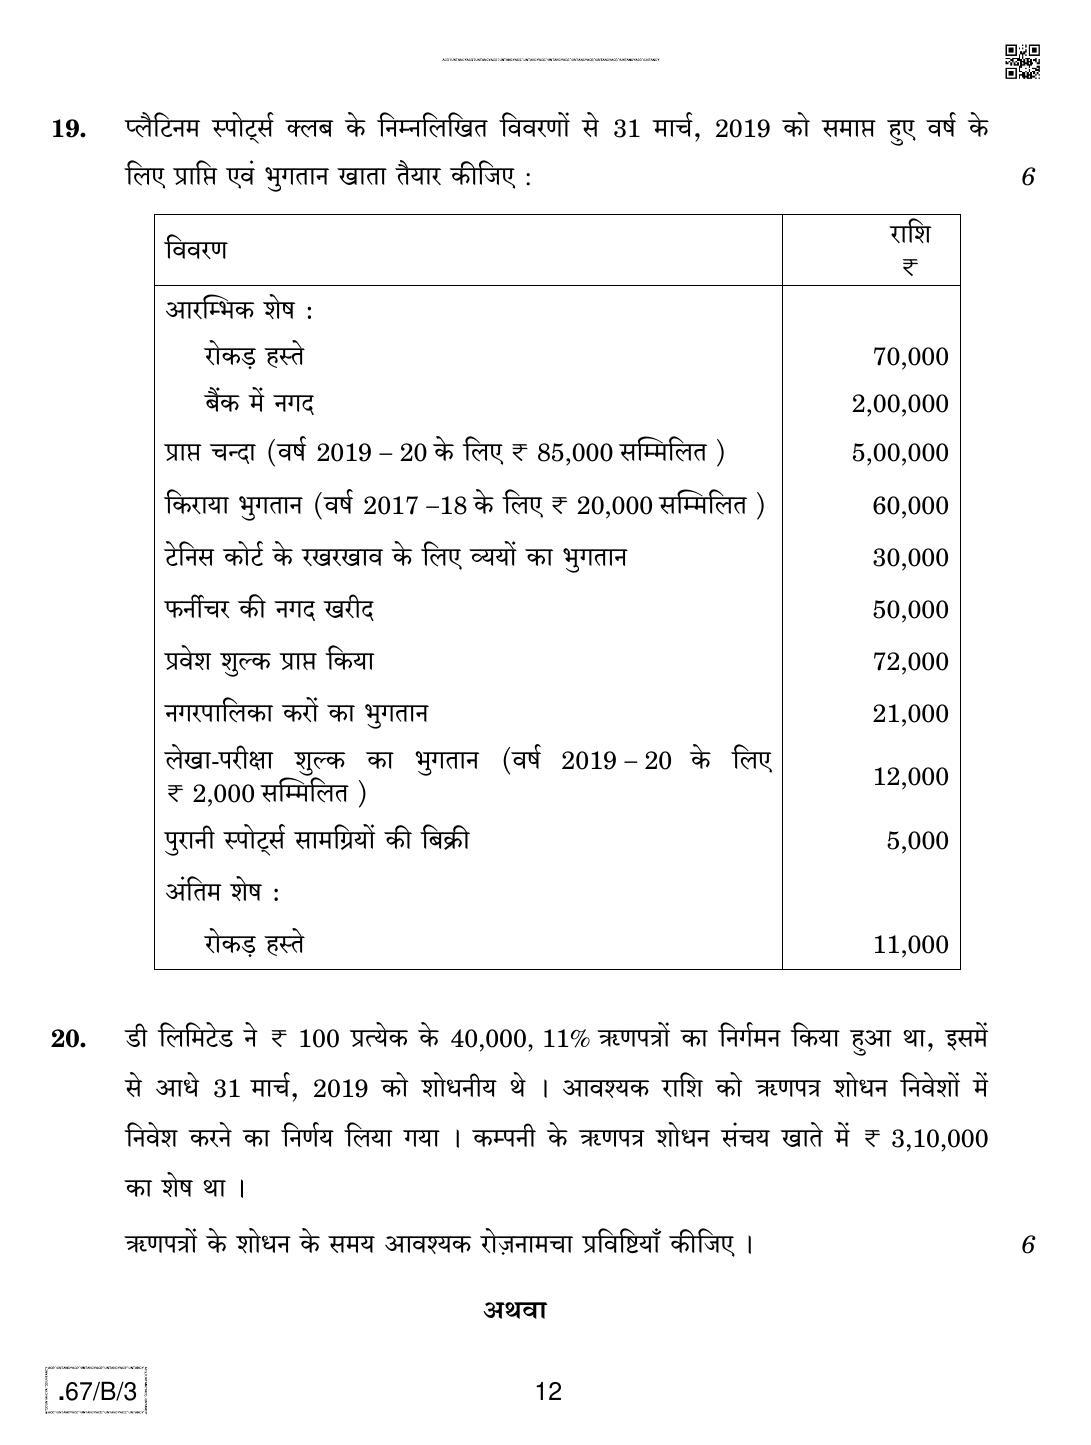 CBSE Class 12 67-C-3 - Accountancy 2020 Compartment Question Paper - Page 12